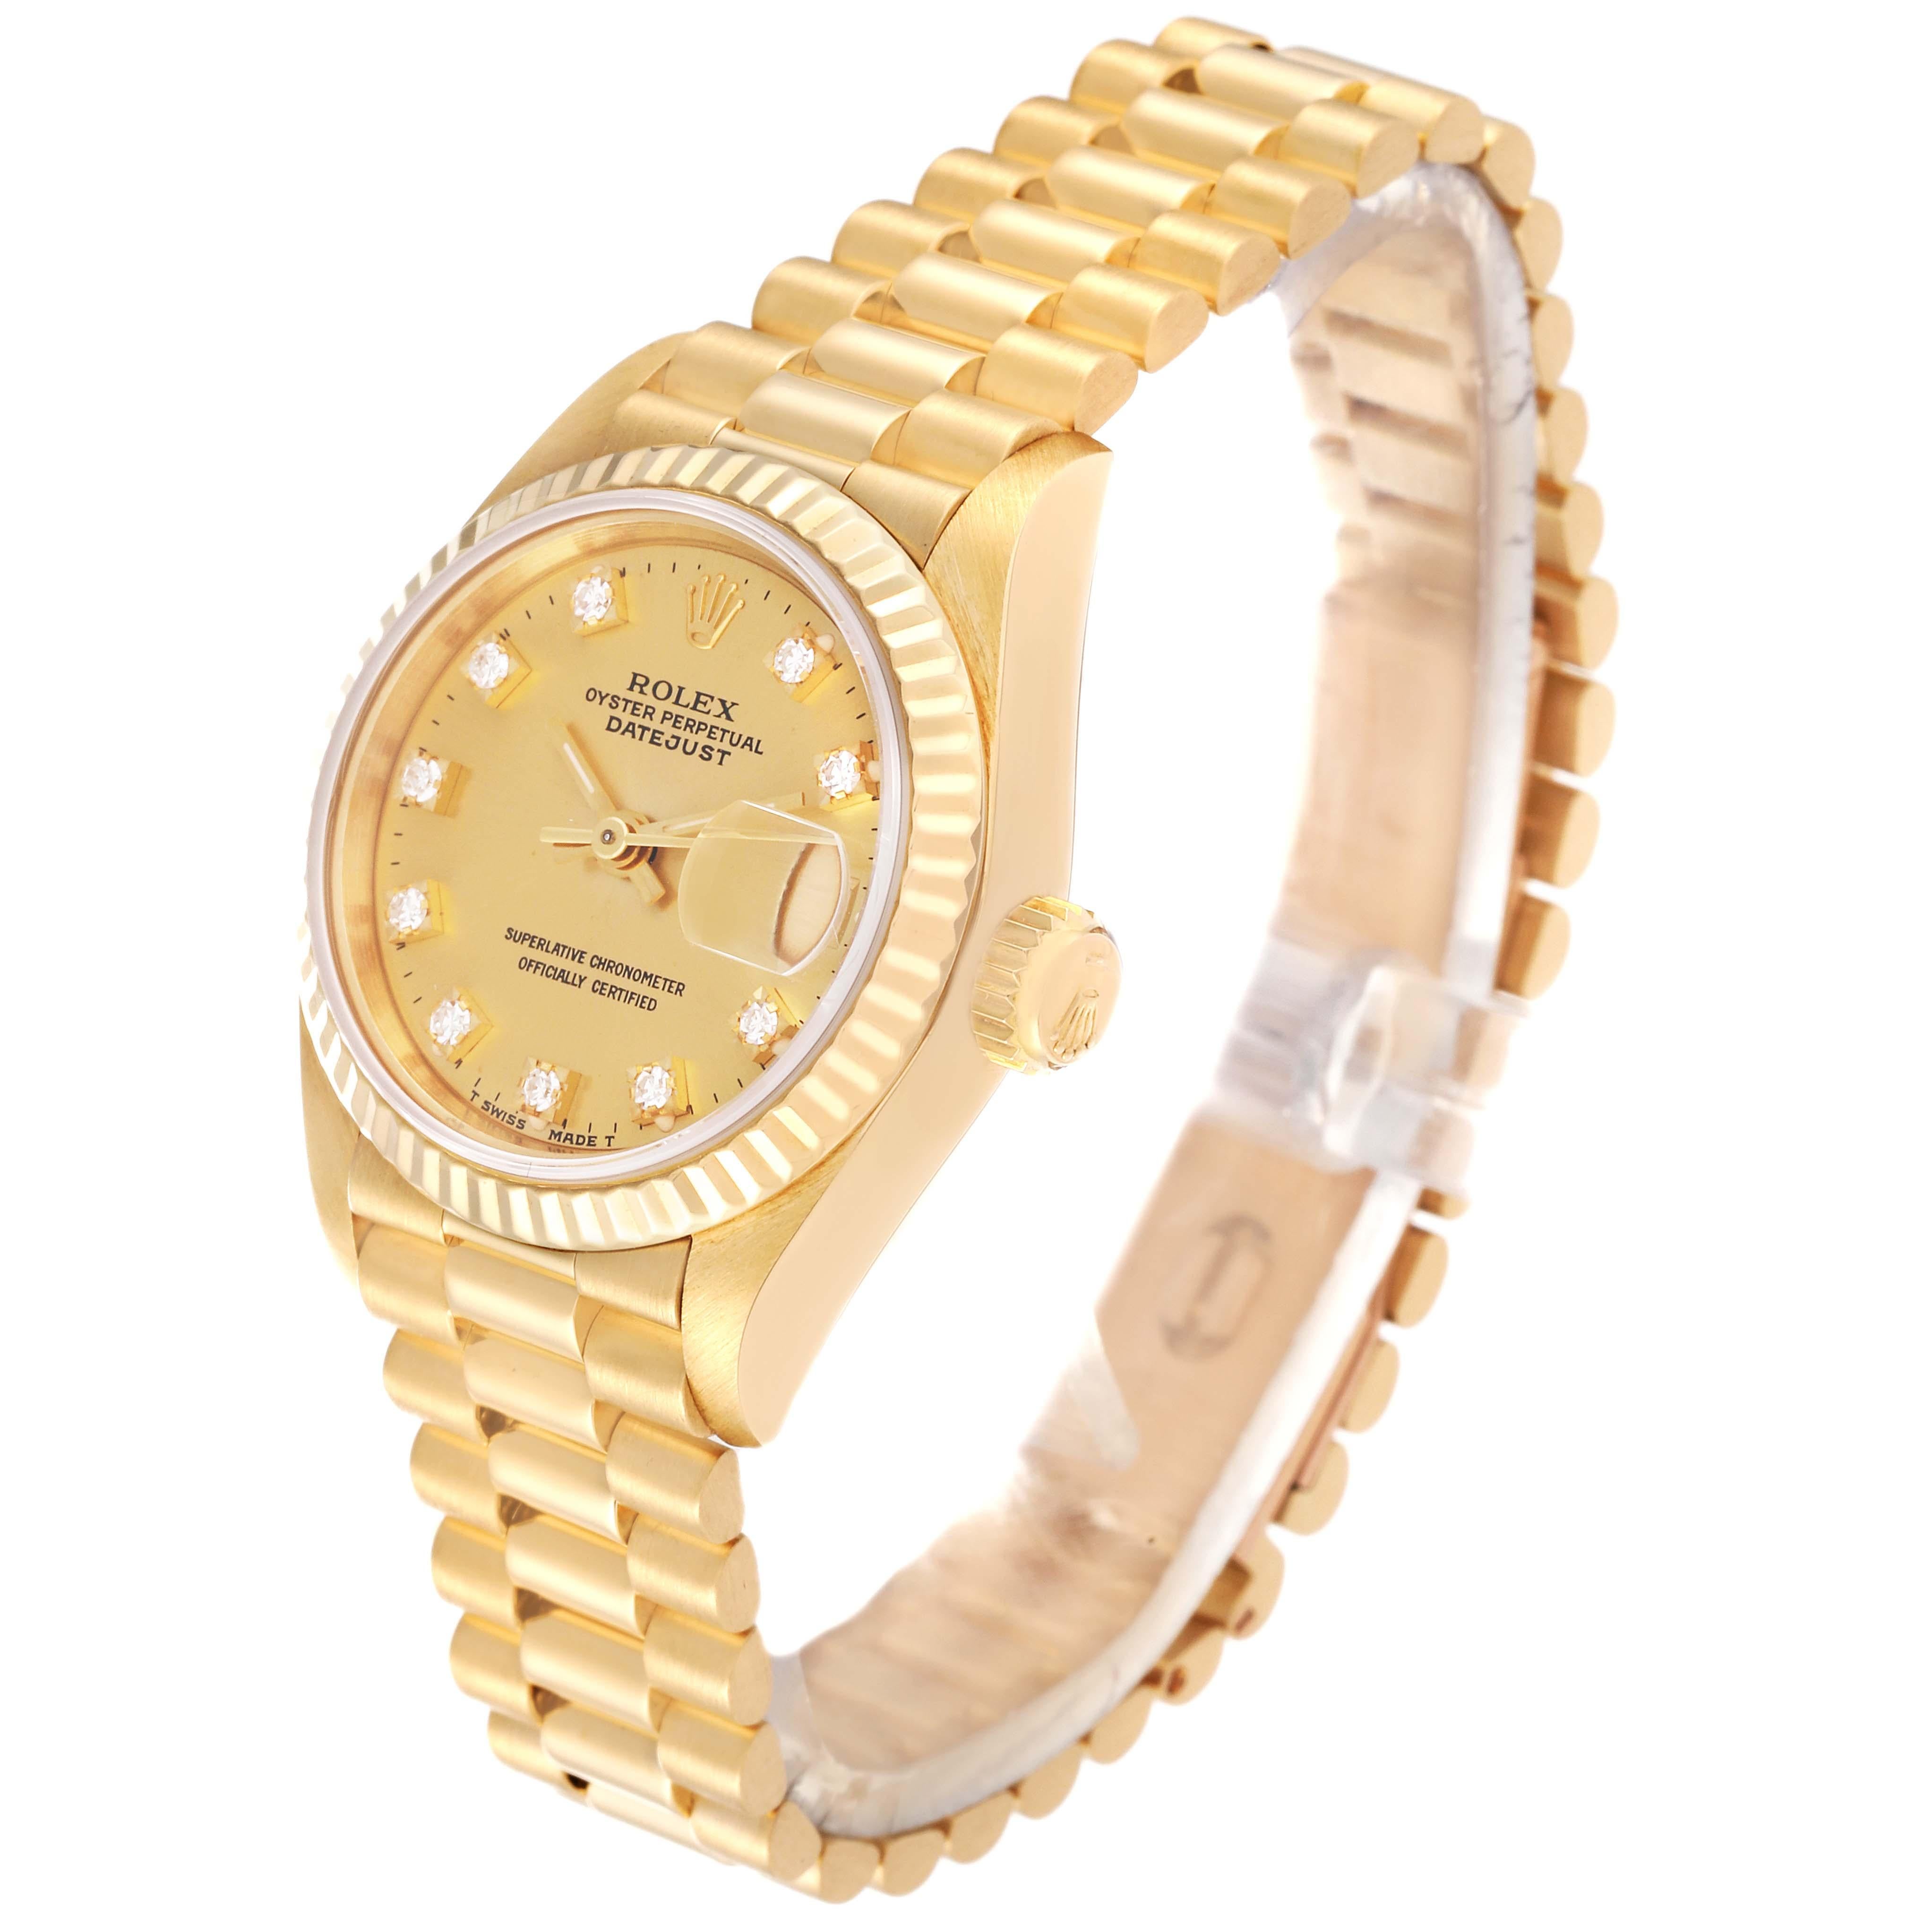 Rolex Datejust President Champagne Diamond Dial Yellow Gold Ladies Watch 69178 In Excellent Condition For Sale In Atlanta, GA